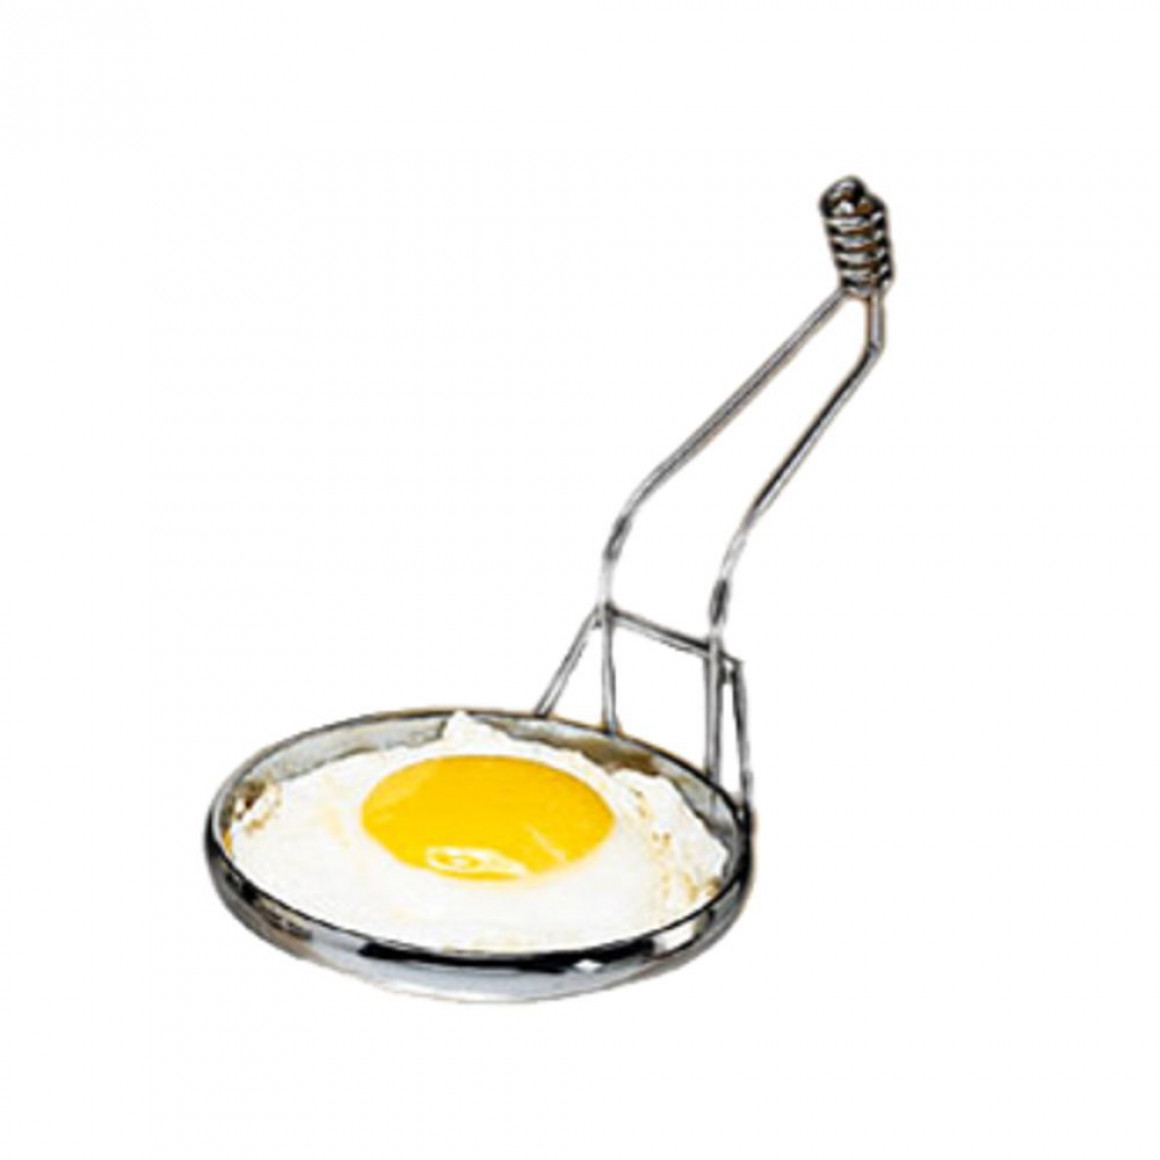 EGG RING, COIL HANDLE, 3-1/8